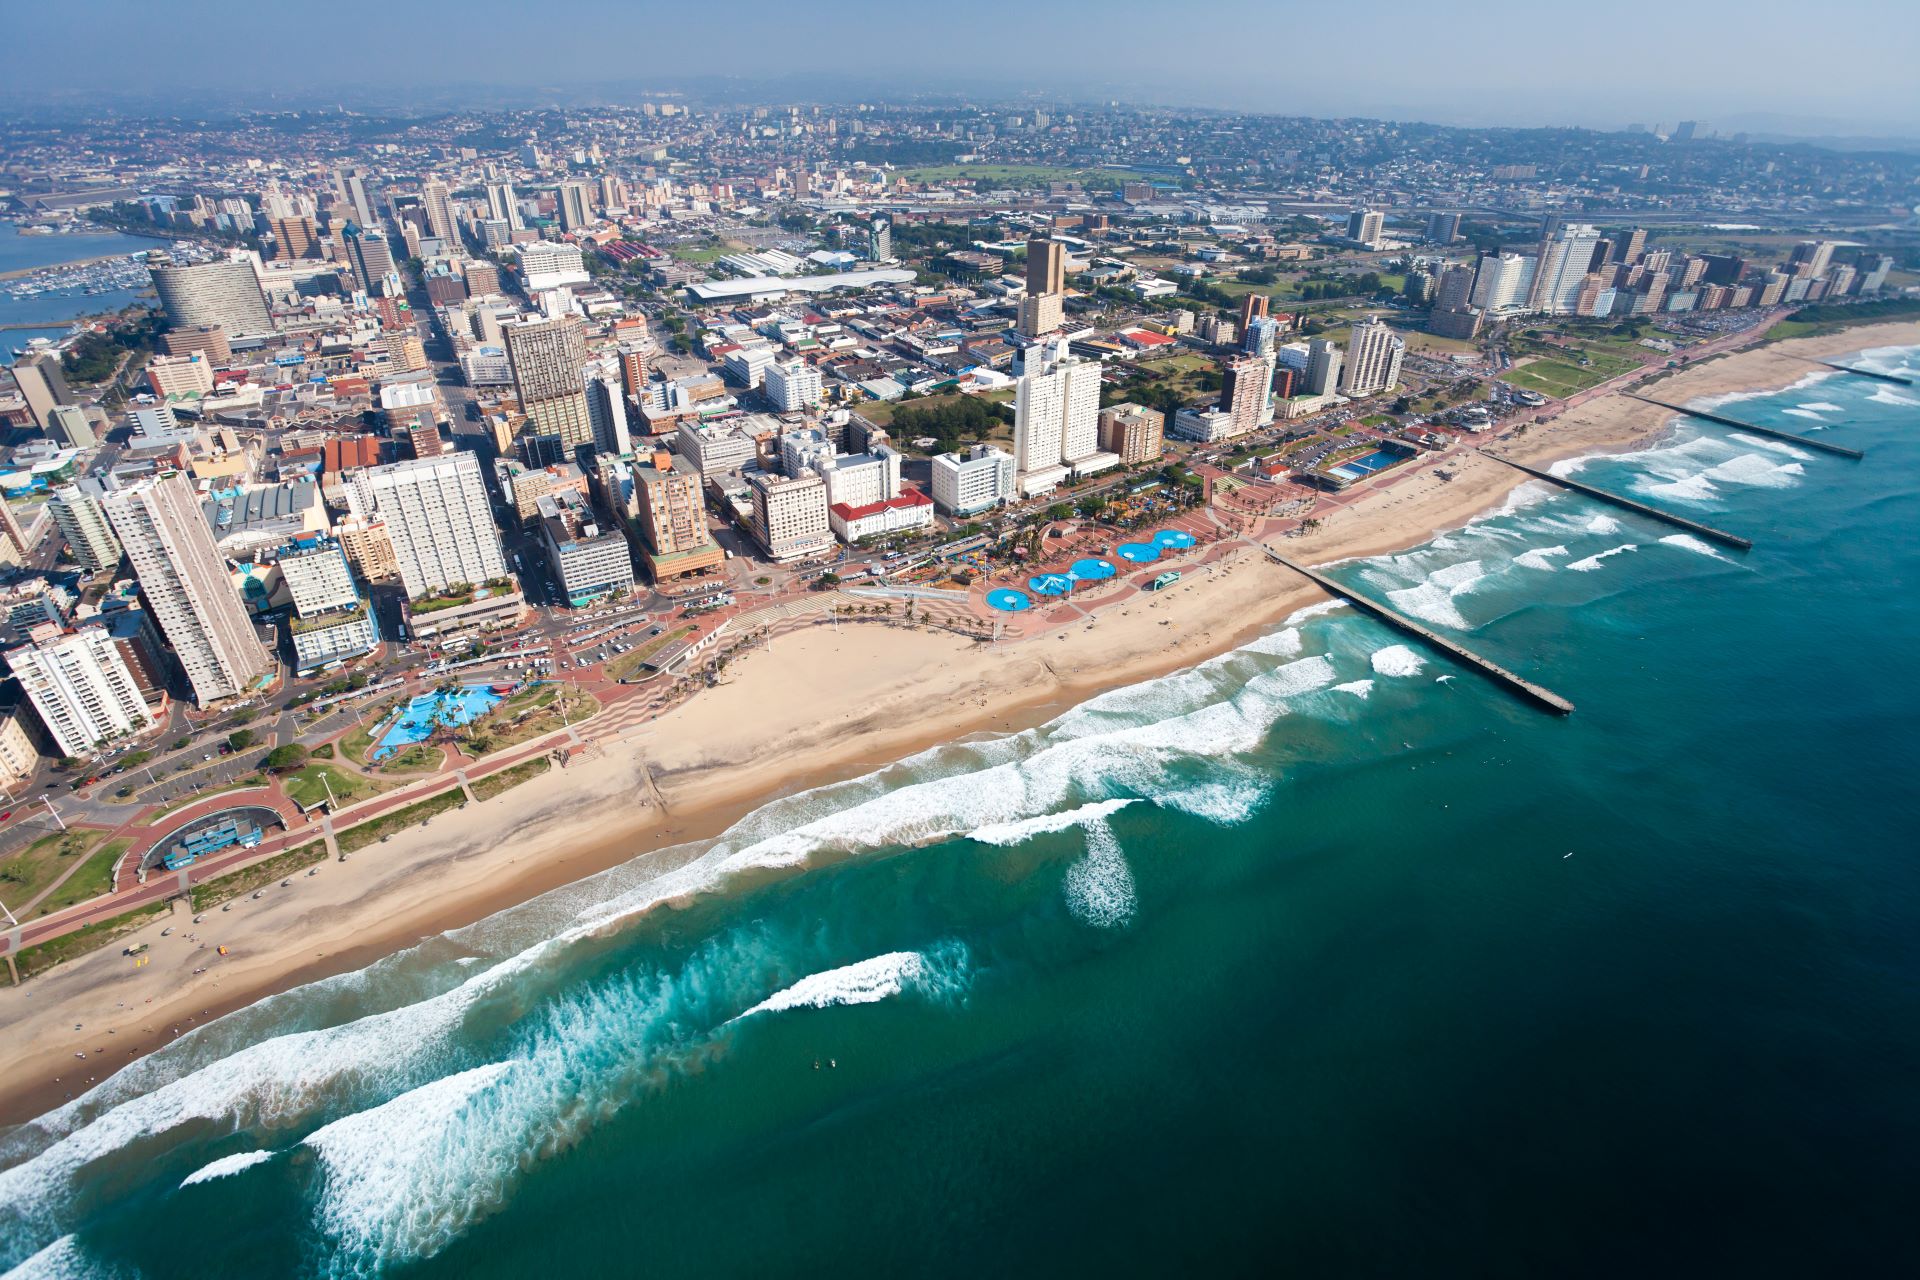 Decorative image showing an aerial view of the coastline in South Africa with beaches and city buildings